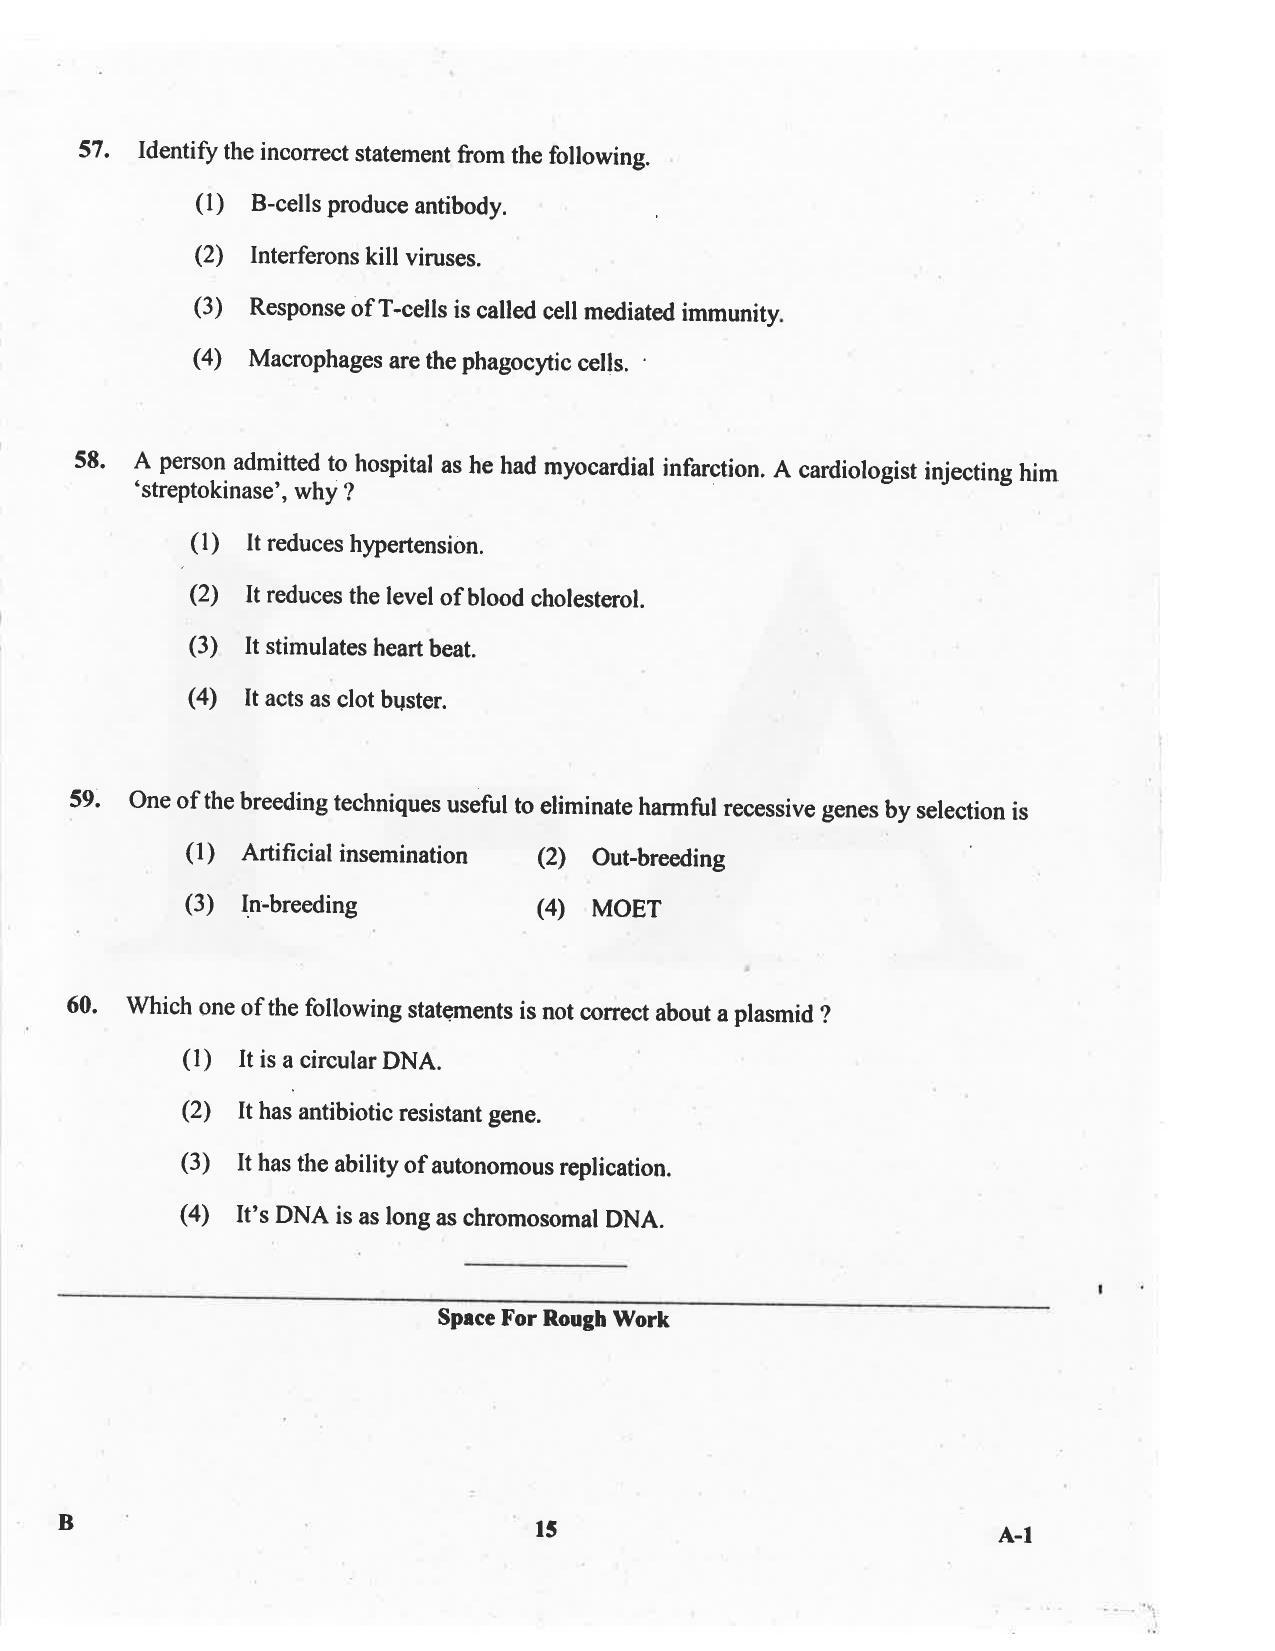 KCET Biology 2016 Question Papers - Page 15